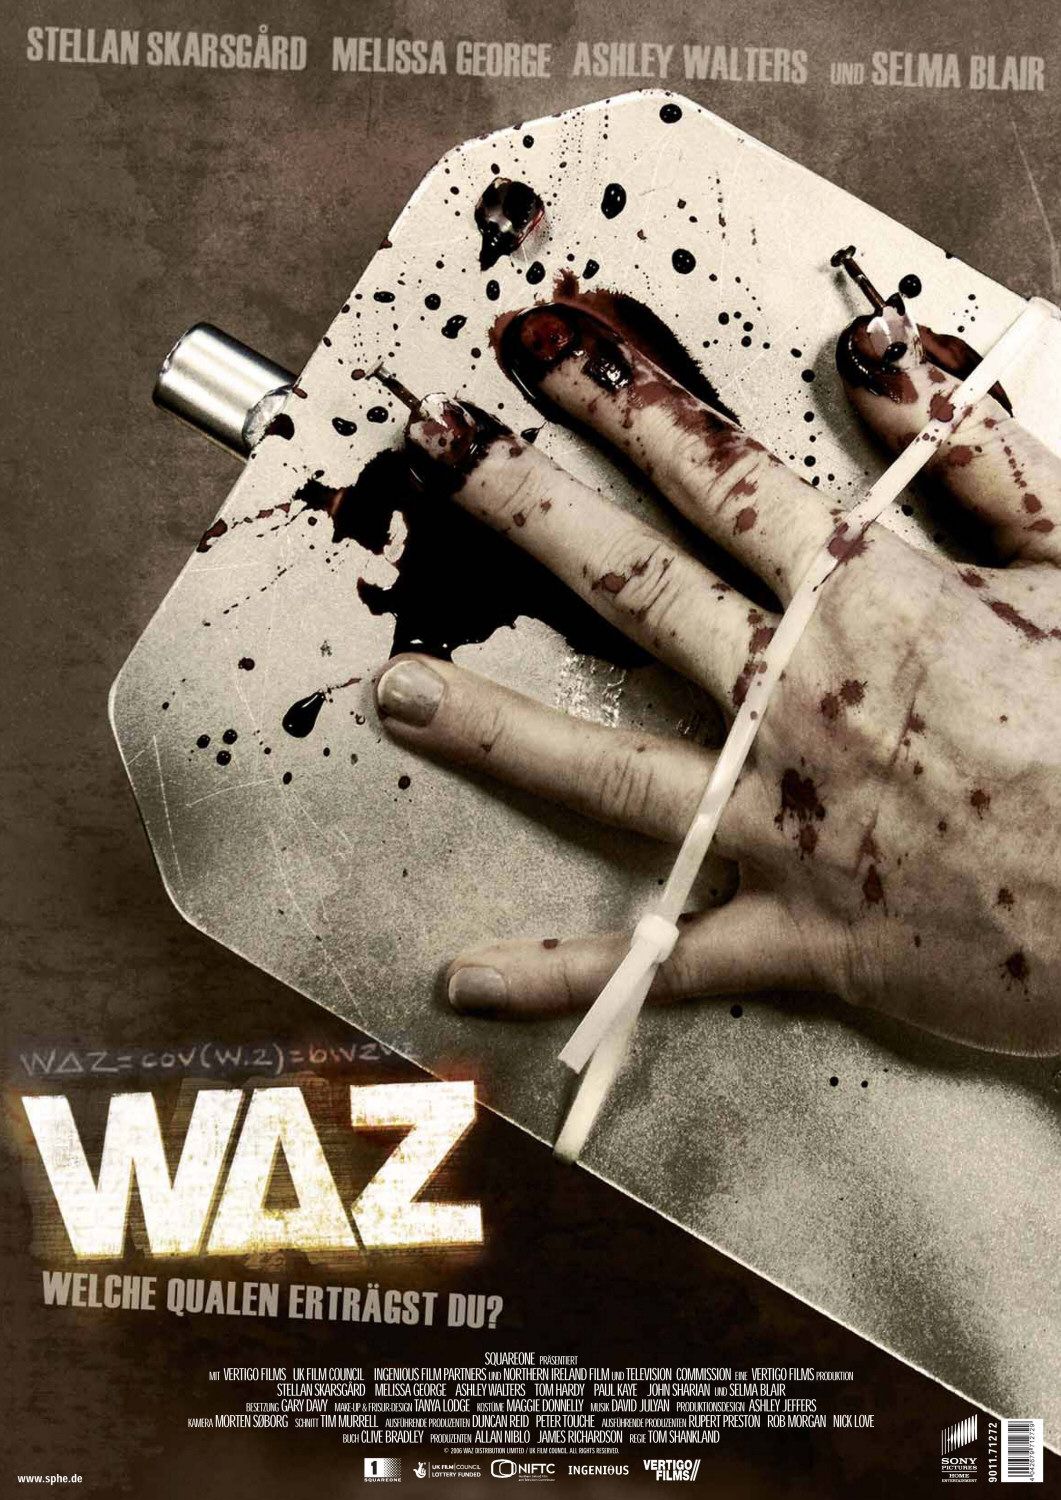 Extra Large Movie Poster Image for Waz (#4 of 4)